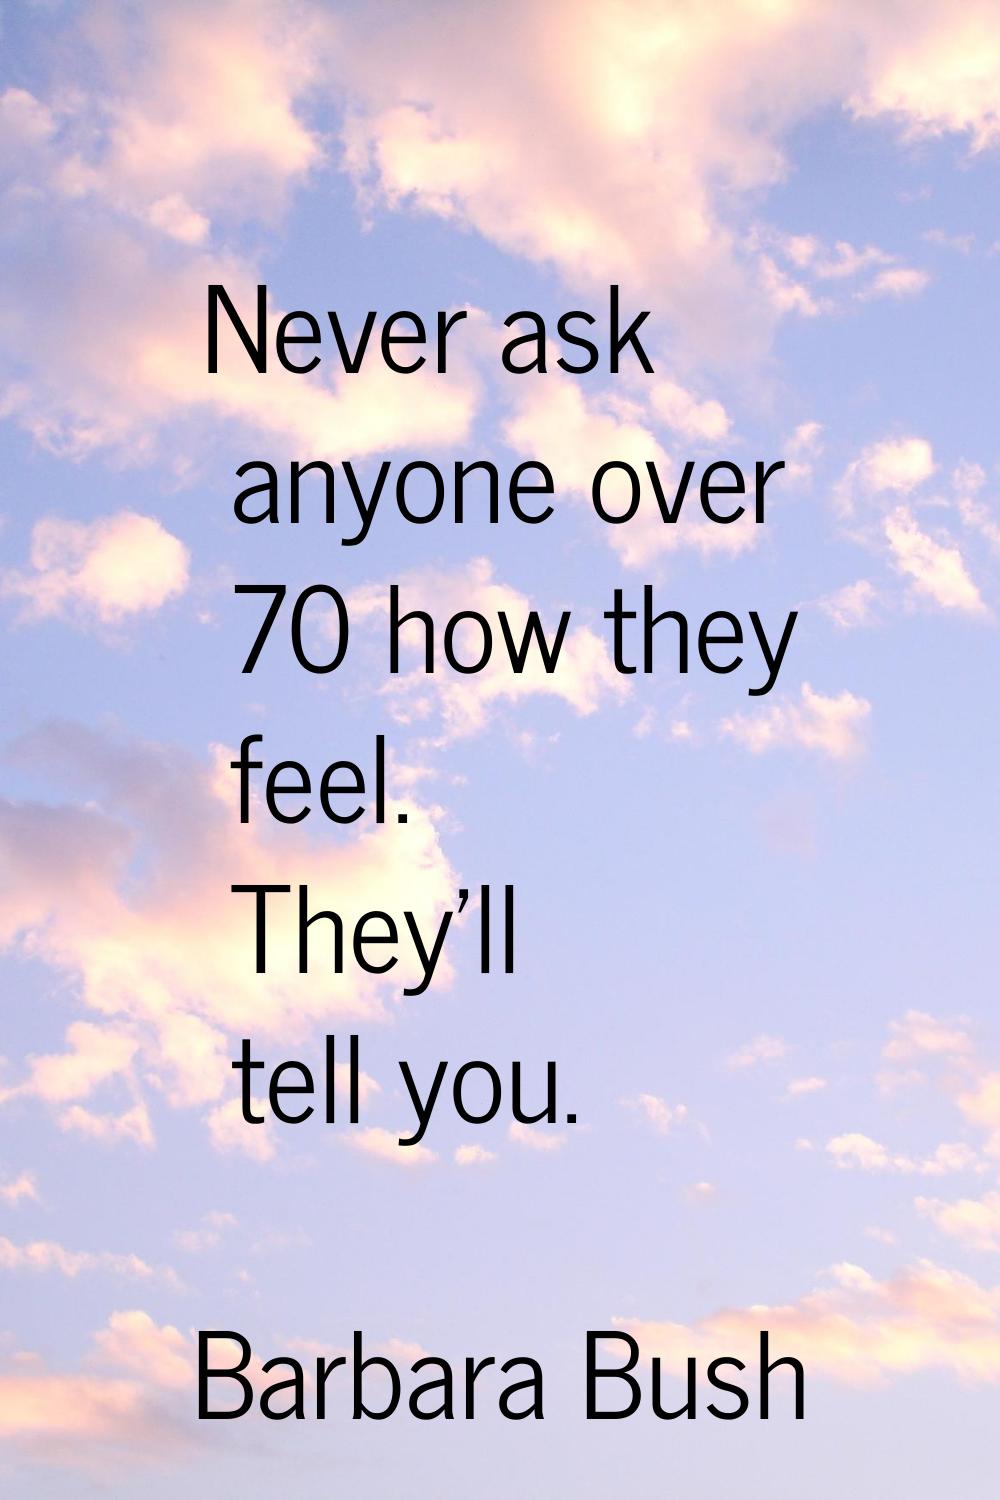 Never ask anyone over 70 how they feel. They'll tell you.